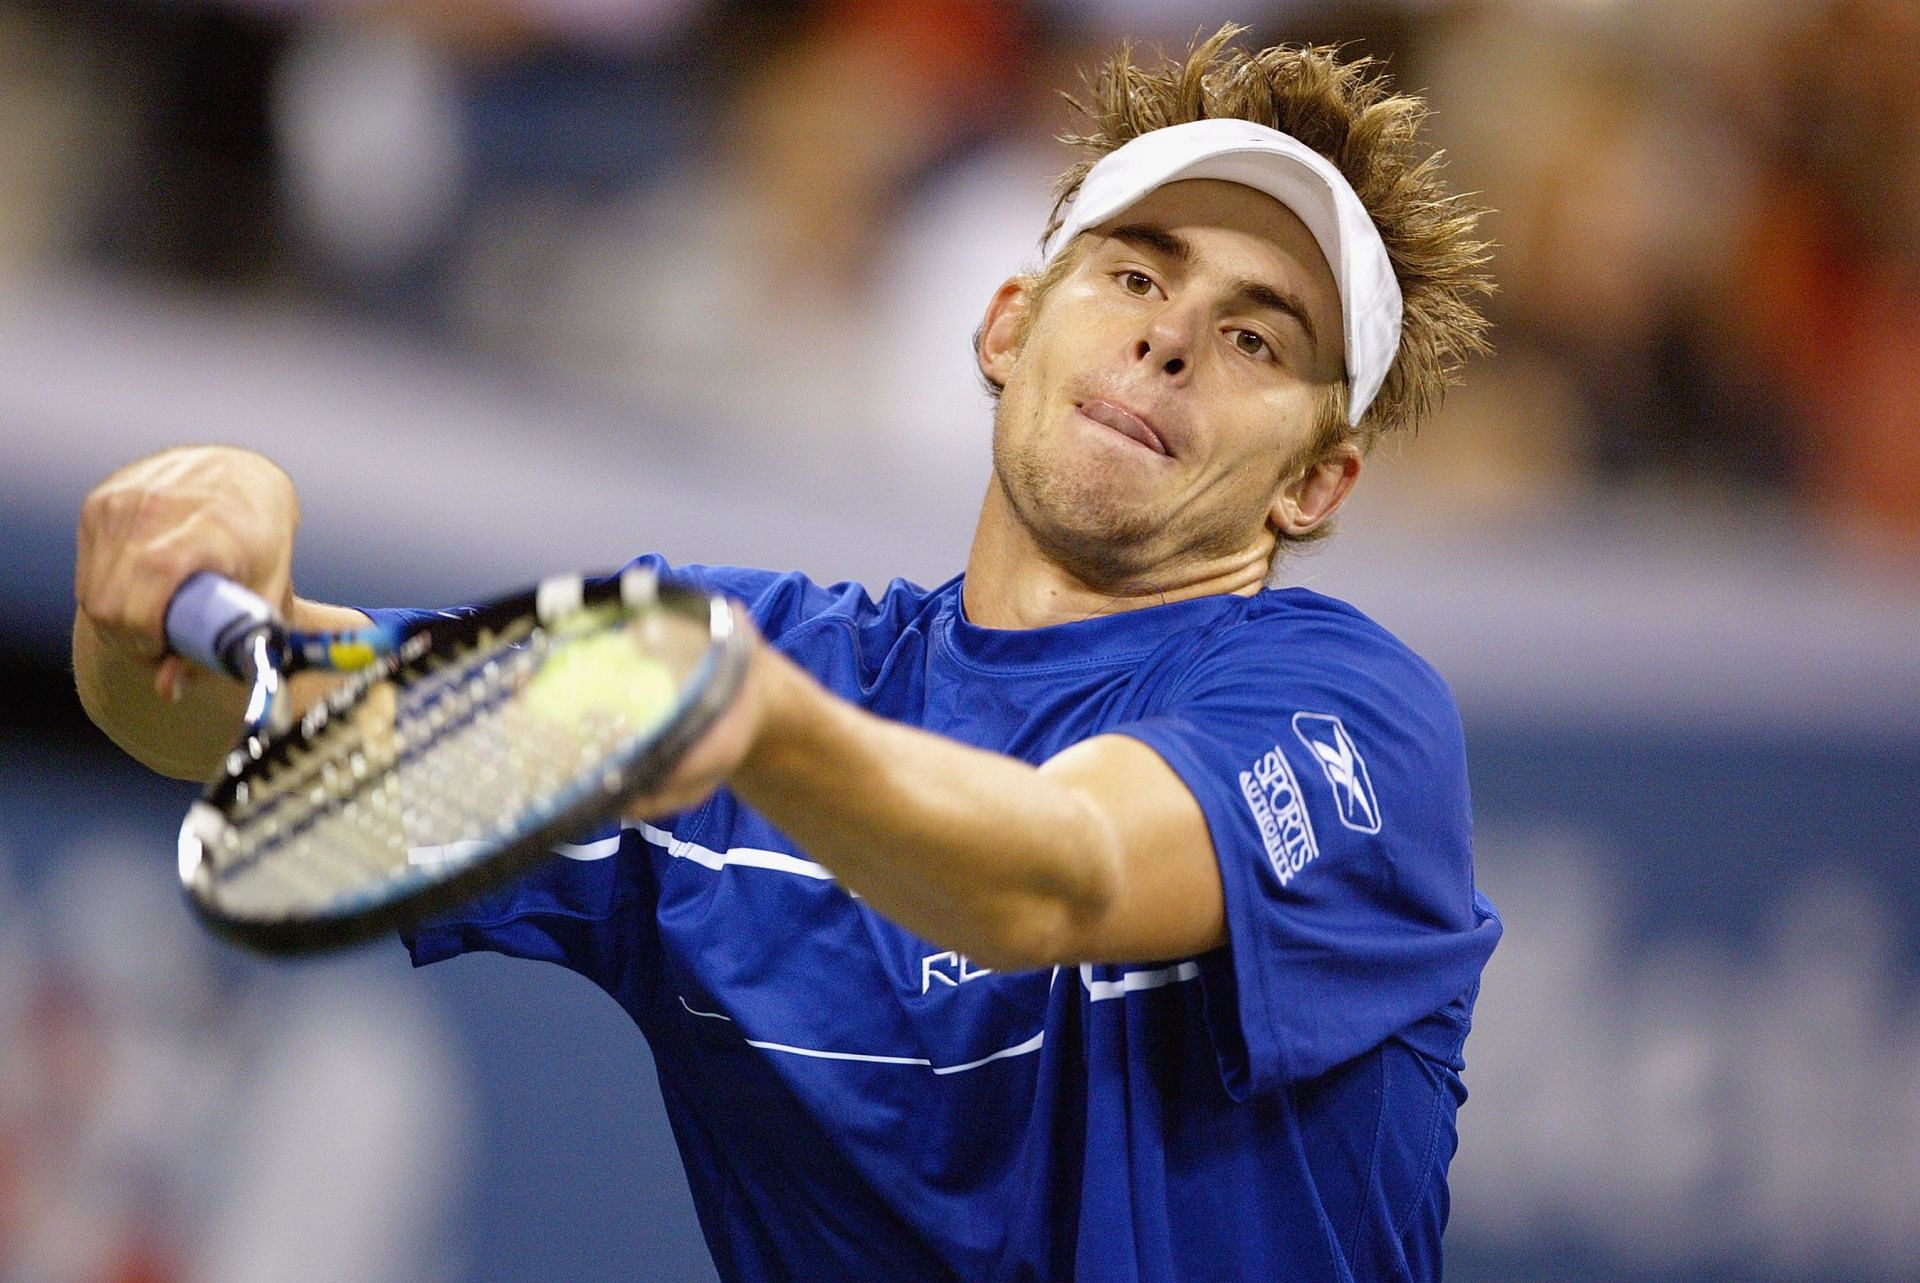 Andy Roddick at the 2002 US Open